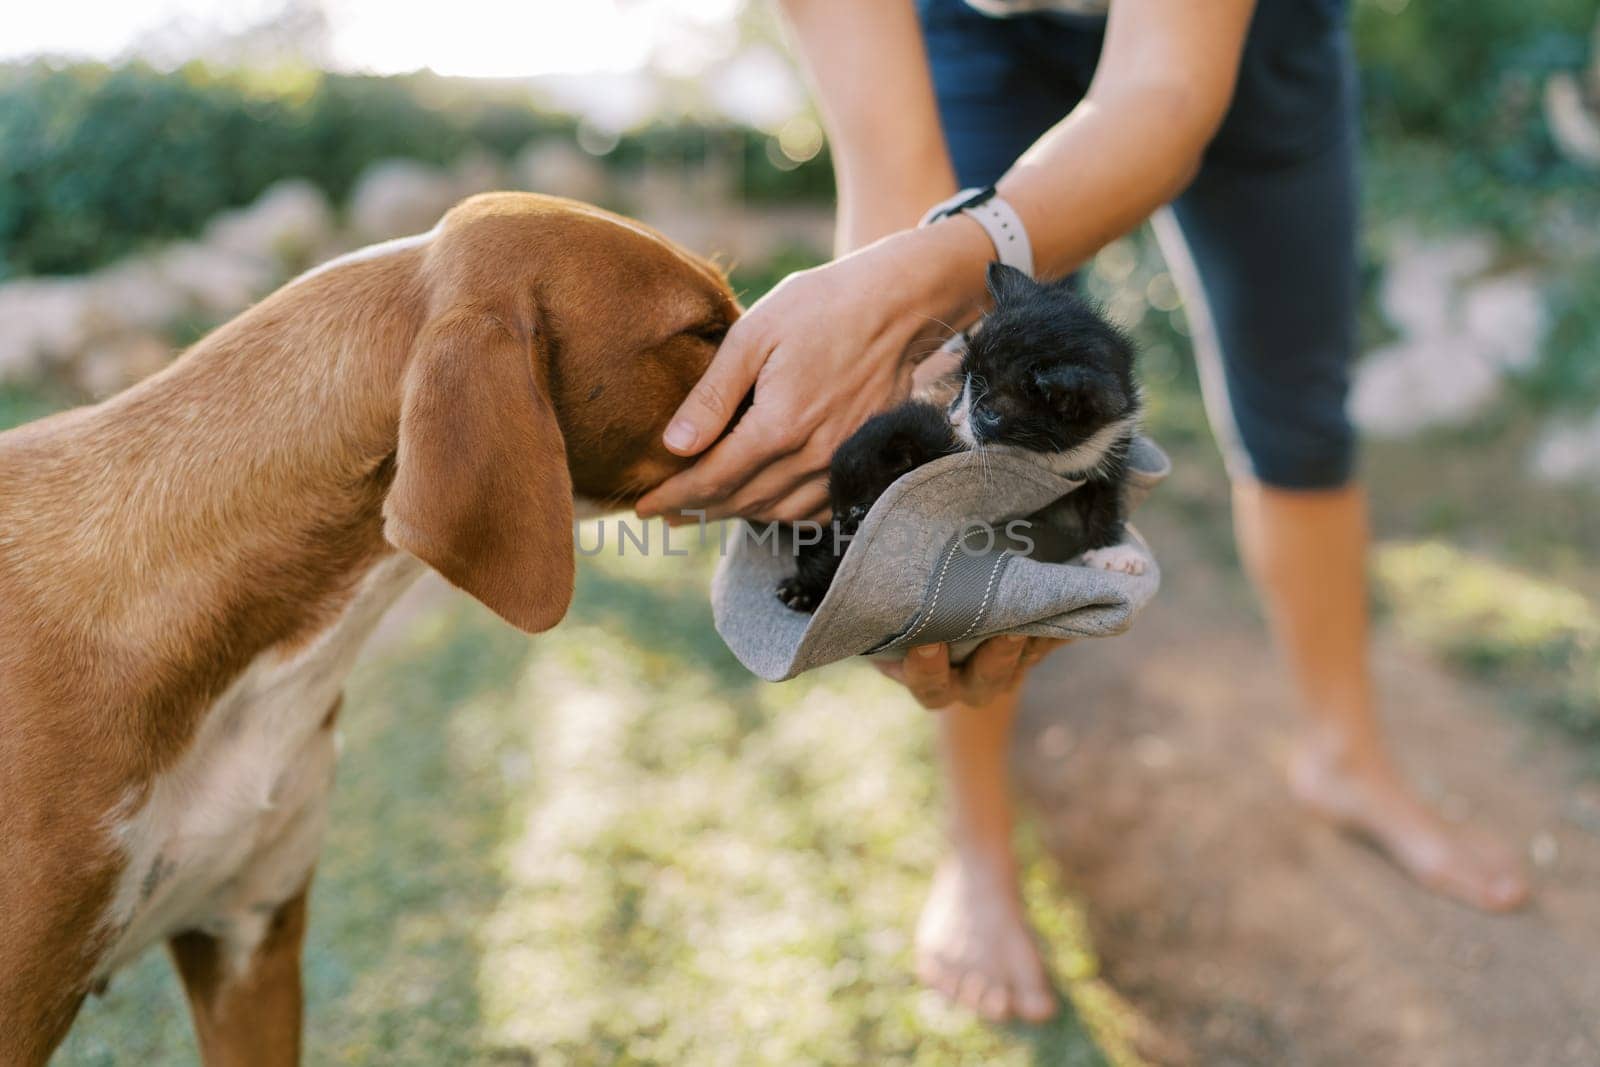 Dog sniffs kittens in a hat in the hands of a woman standing in the park by Nadtochiy